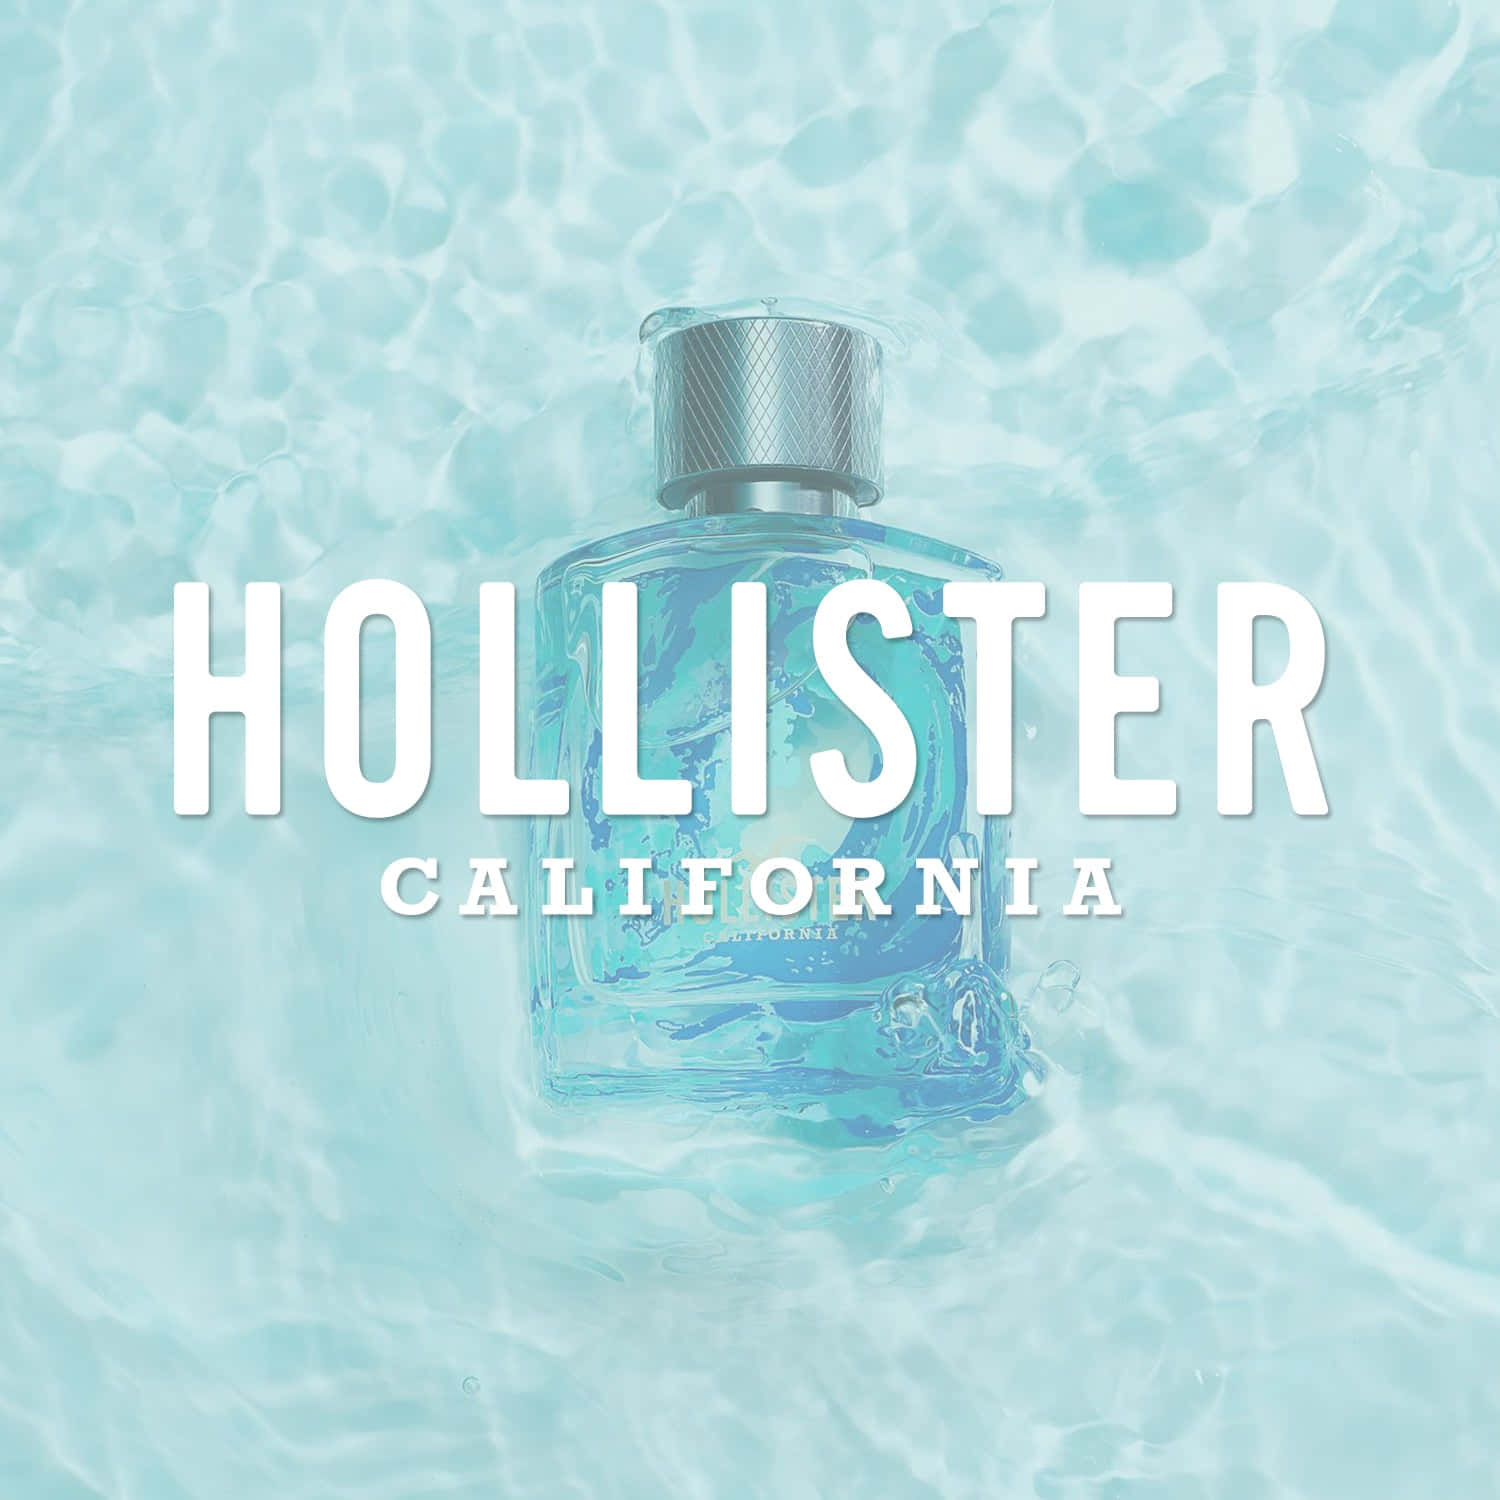 Feel the comfort of the warm ocean breeze in the newest clothing line from Hollister